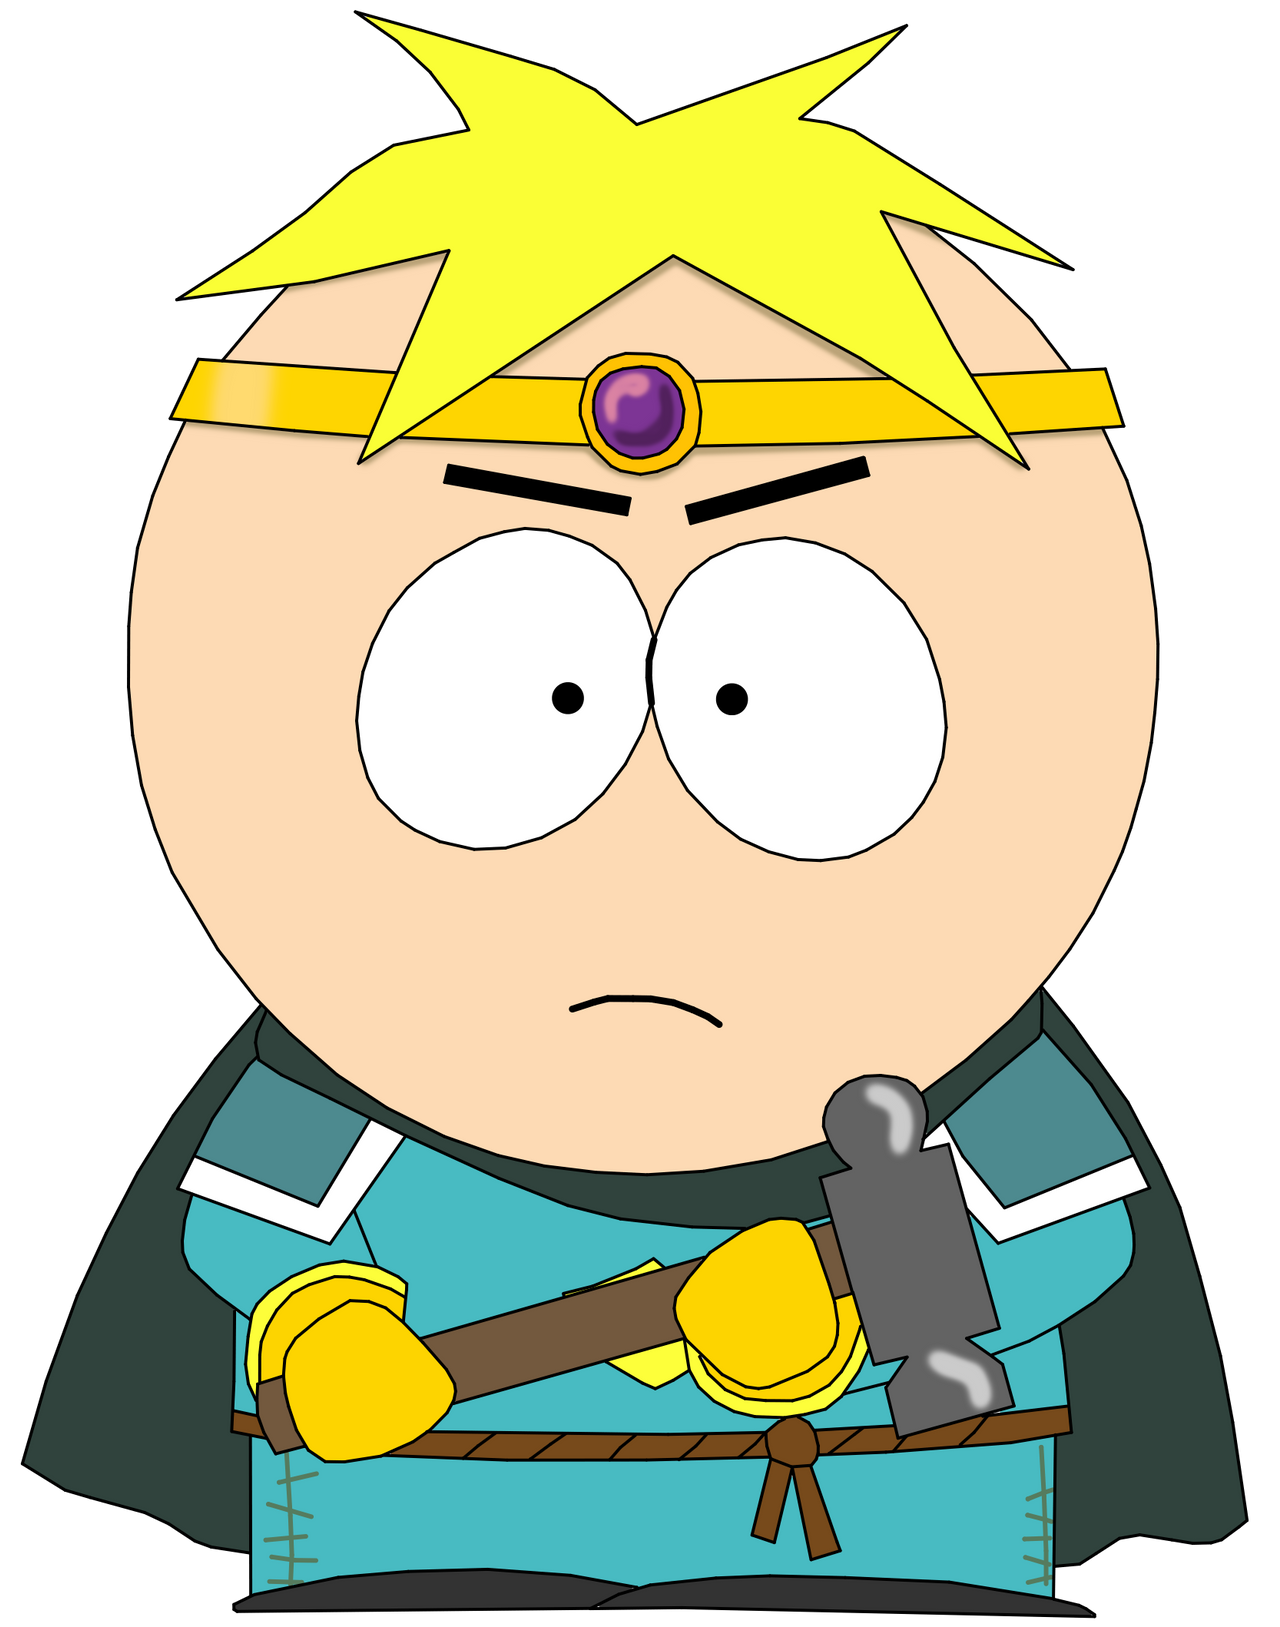 Paladin Butters from South Park by CaptainEdwardTeague on DeviantArt